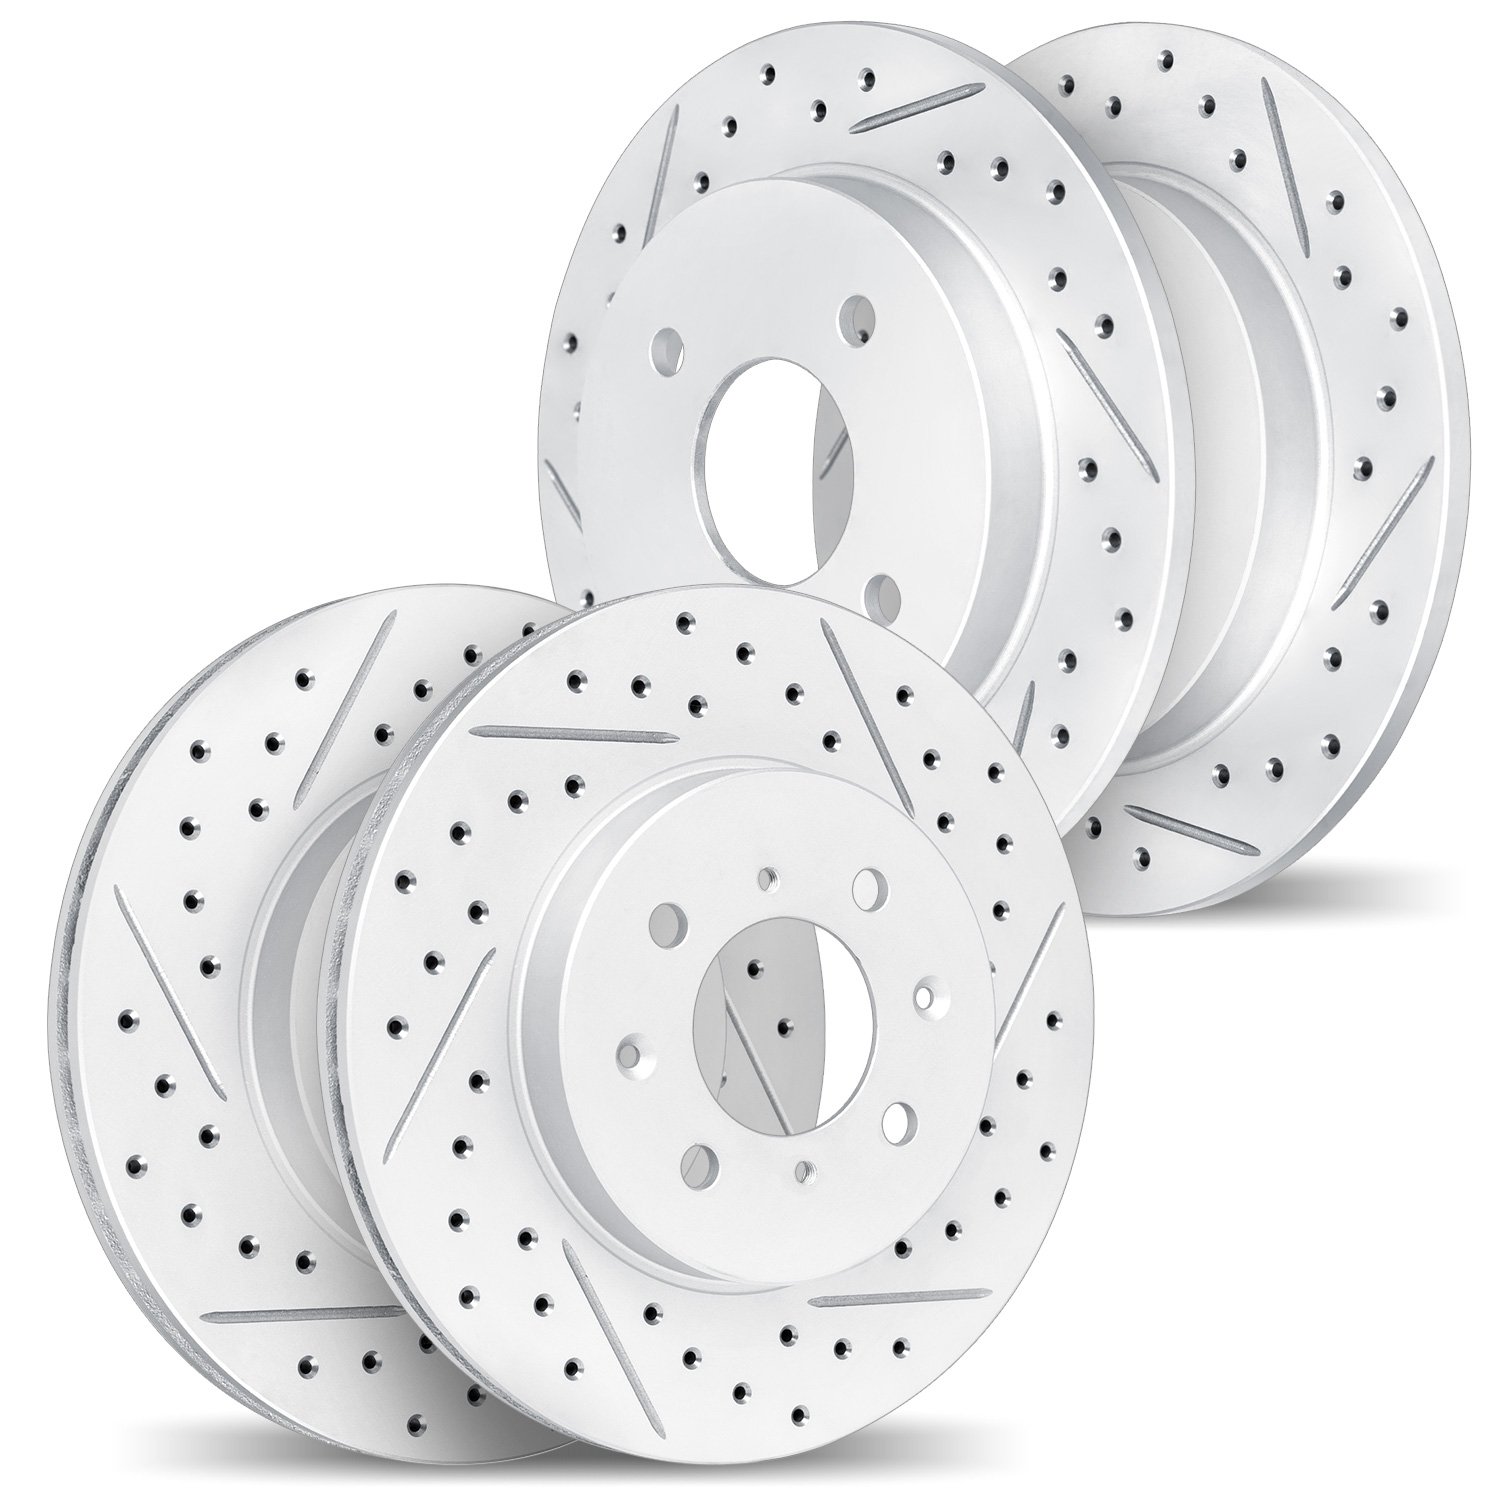 2004-59005 Geoperformance Drilled/Slotted Brake Rotors, 2001-2005 Acura/Honda, Position: Front and Rear